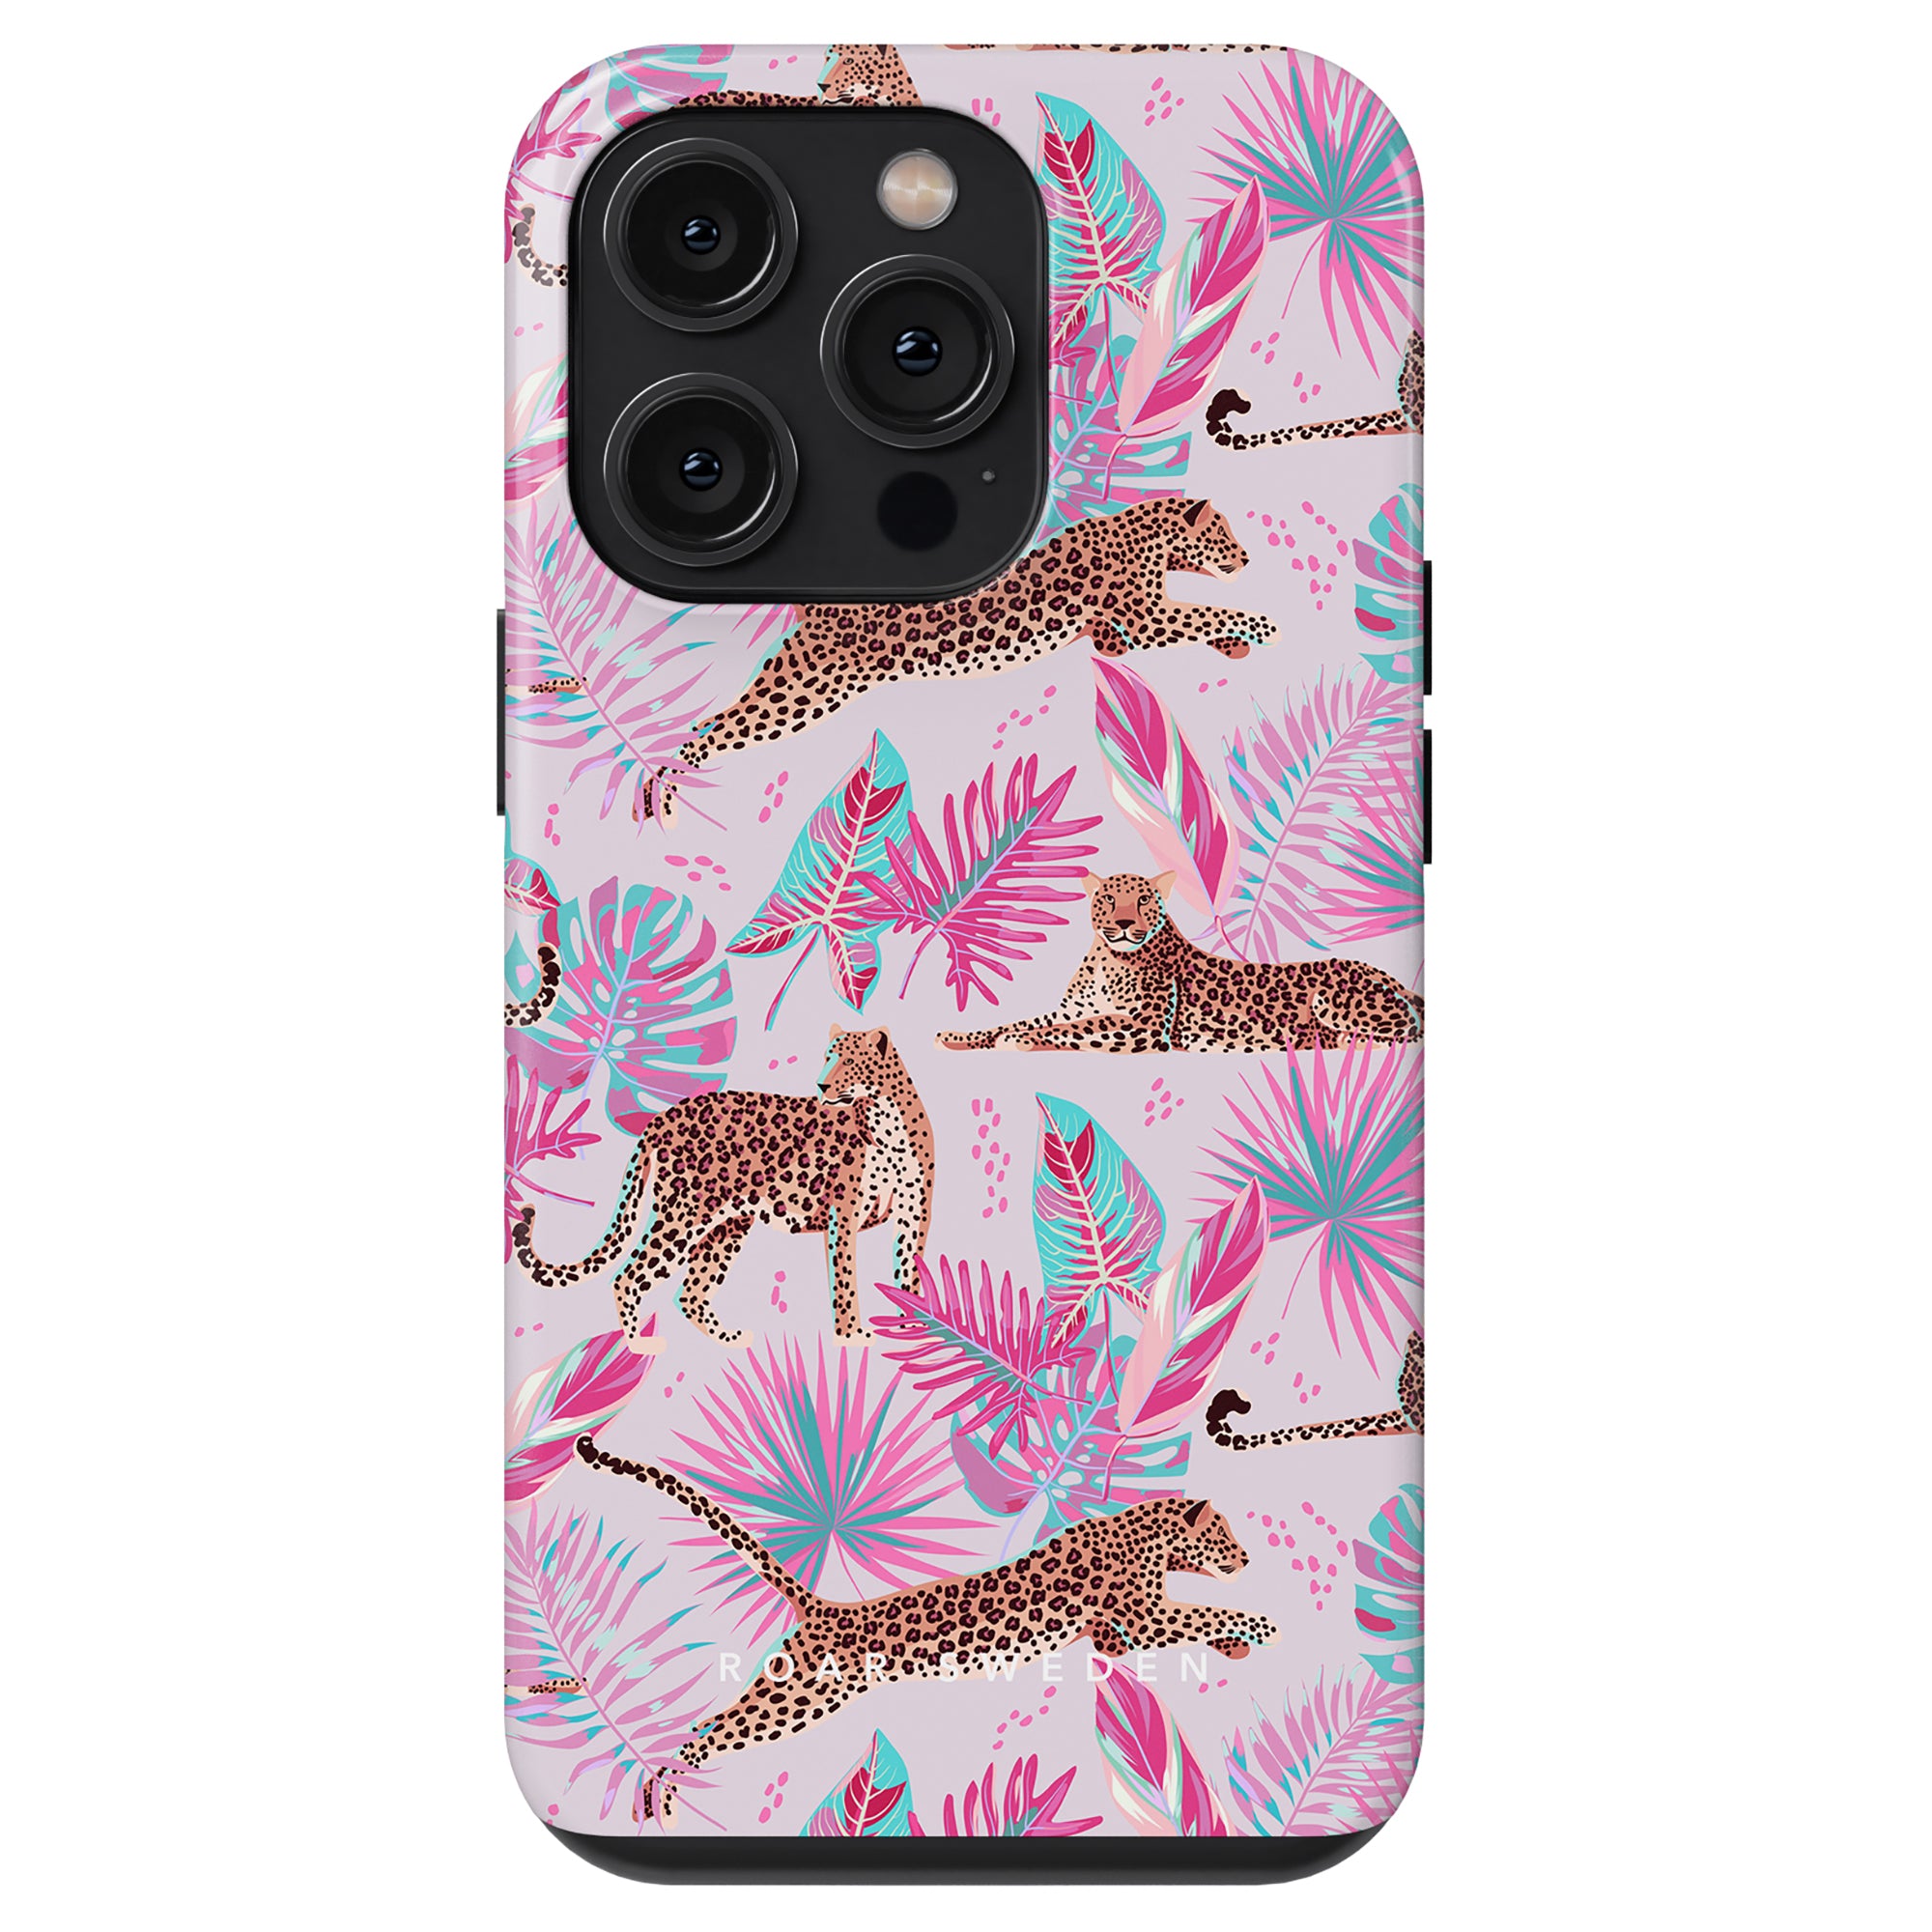 Chill - Tough Case featuring a pink background with a tropical leaf and Leopard kollektion design and cutouts for camera lenses.